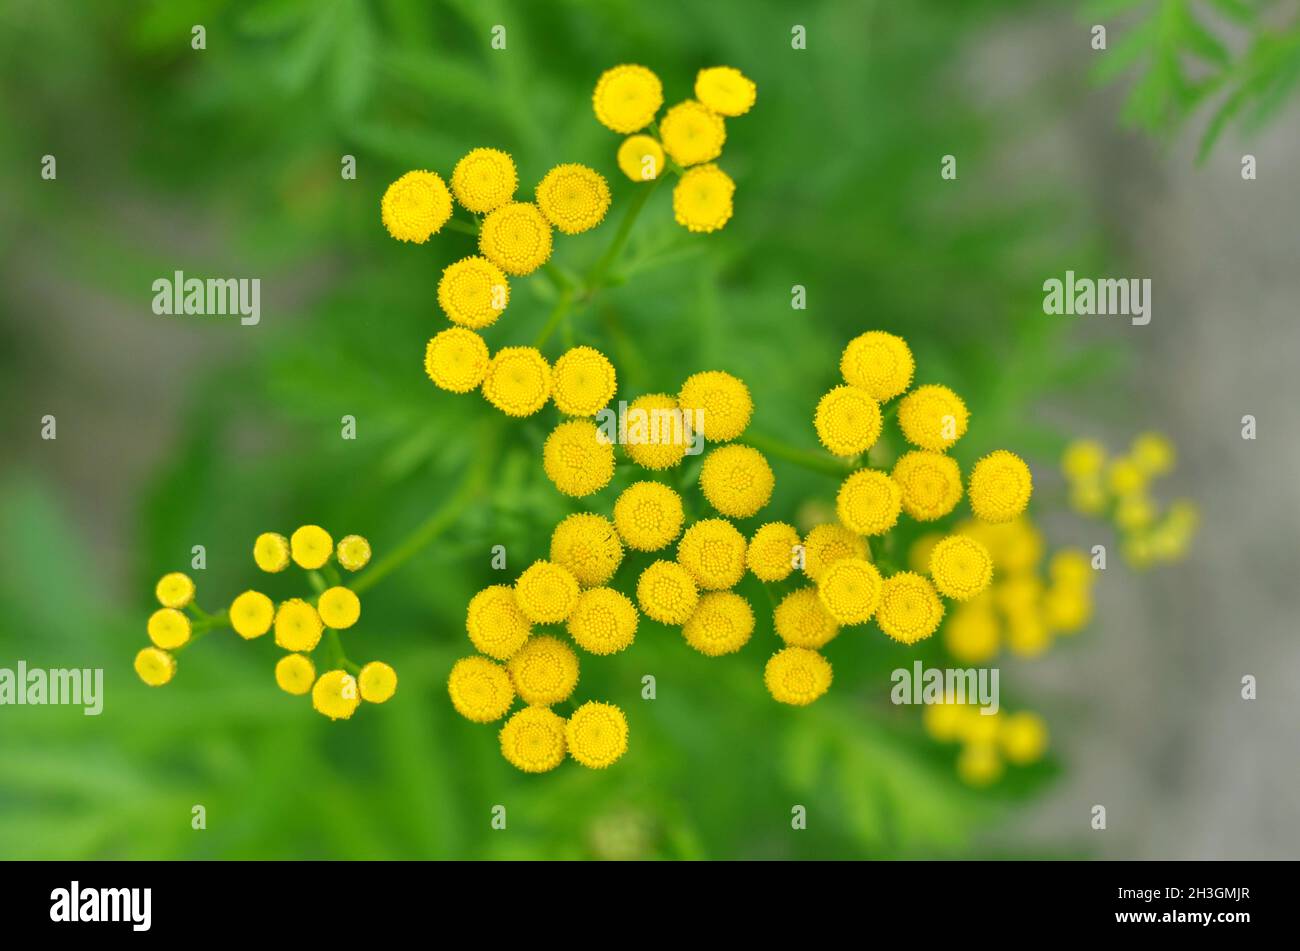 Tansy or Tanacetum vulgare is a perennial herb used in folk medicine. Yellow tansy flowers over green grass in the summer outdoors, top view. Stock Photo